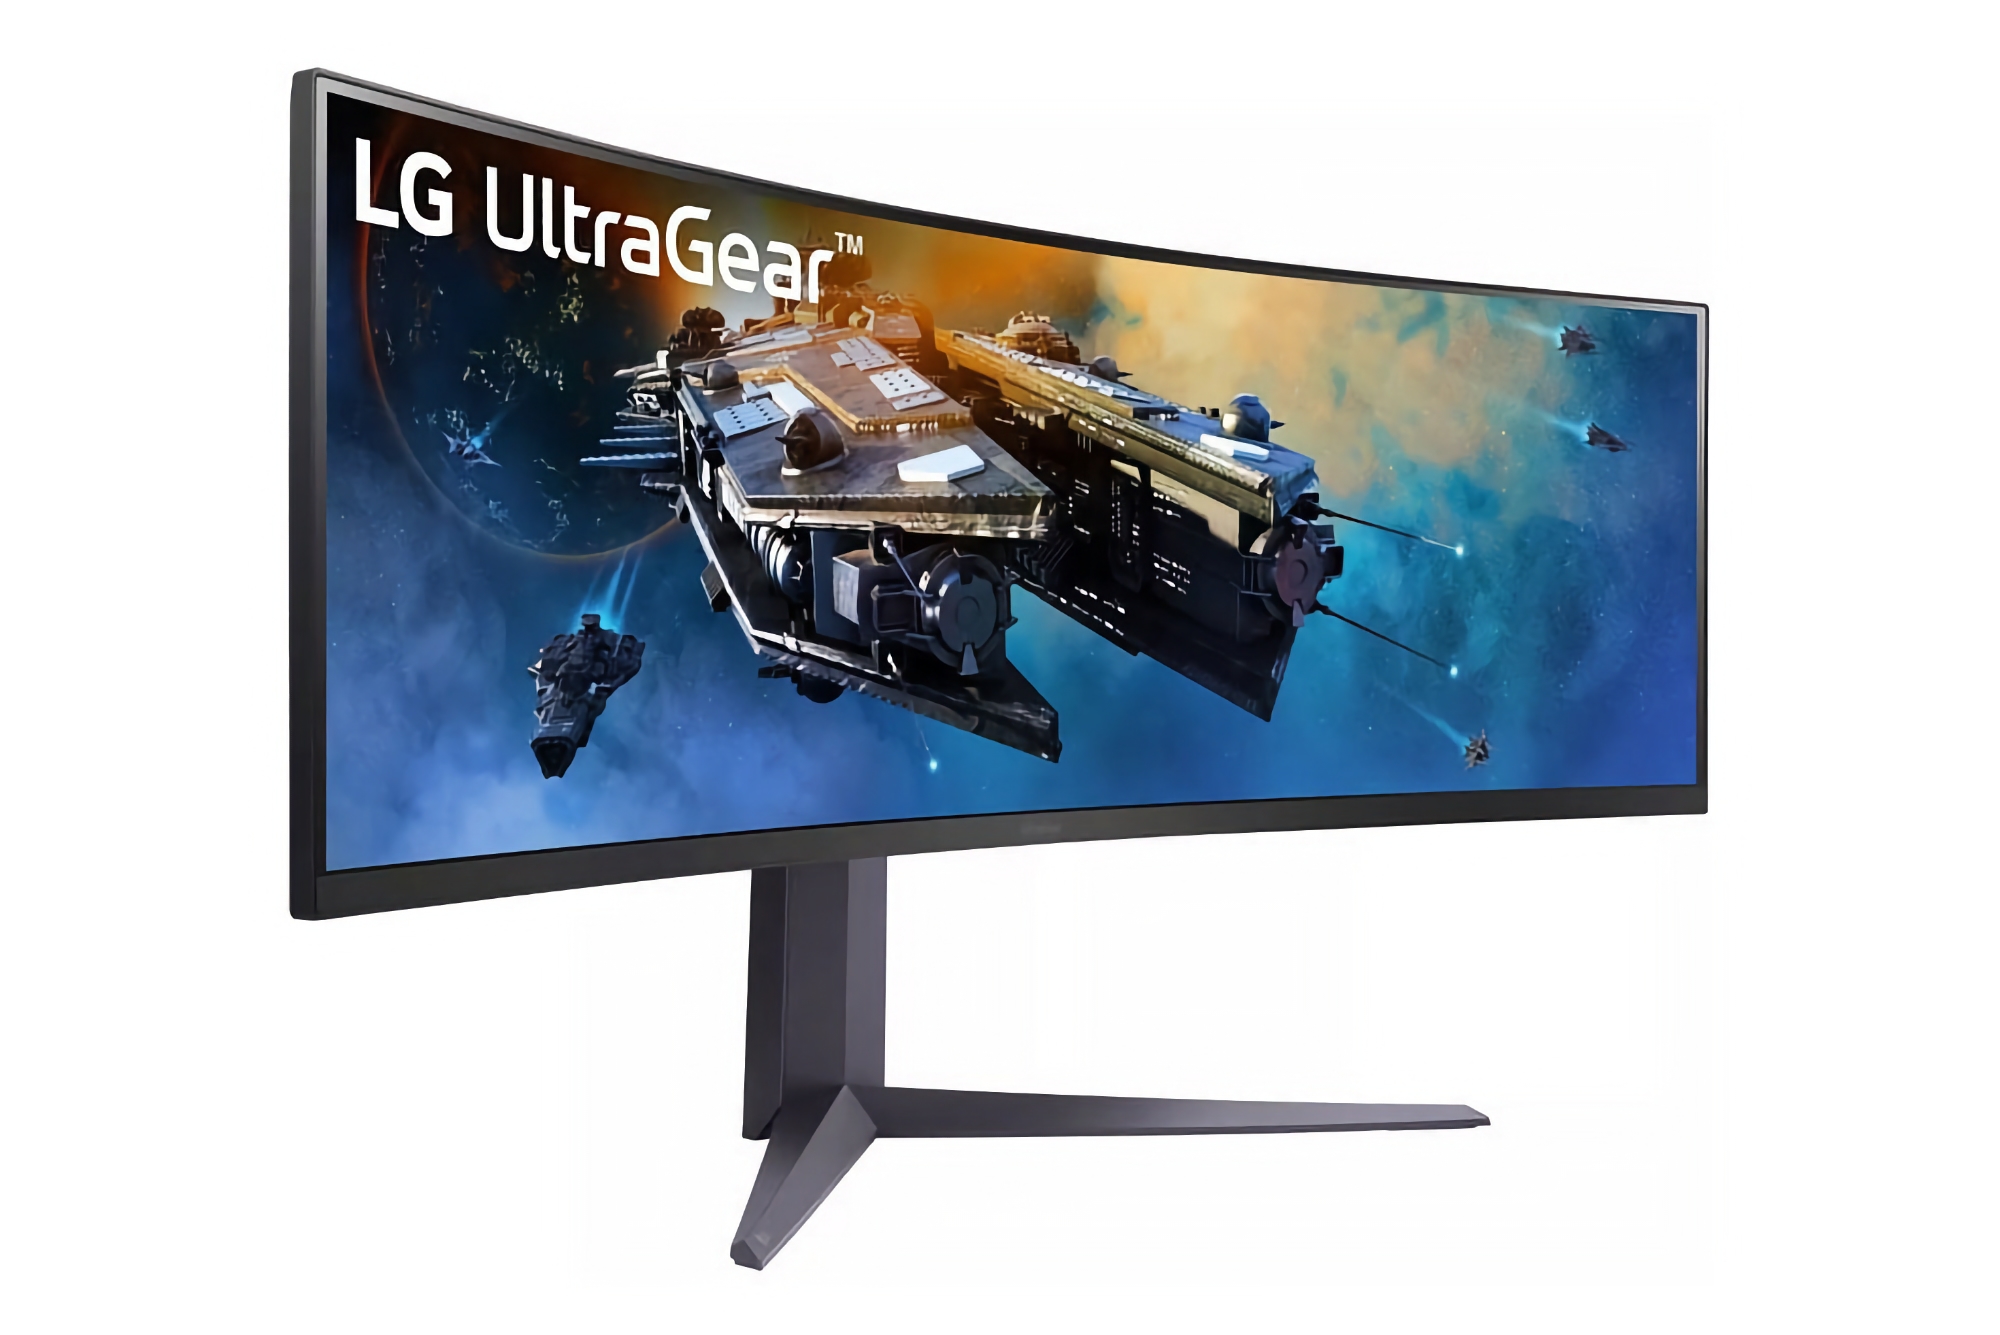 LG Ultragear 45GR65DC and 45GR75DC: 45-inch curved monitors with DQHD resolution and 200Hz resolution